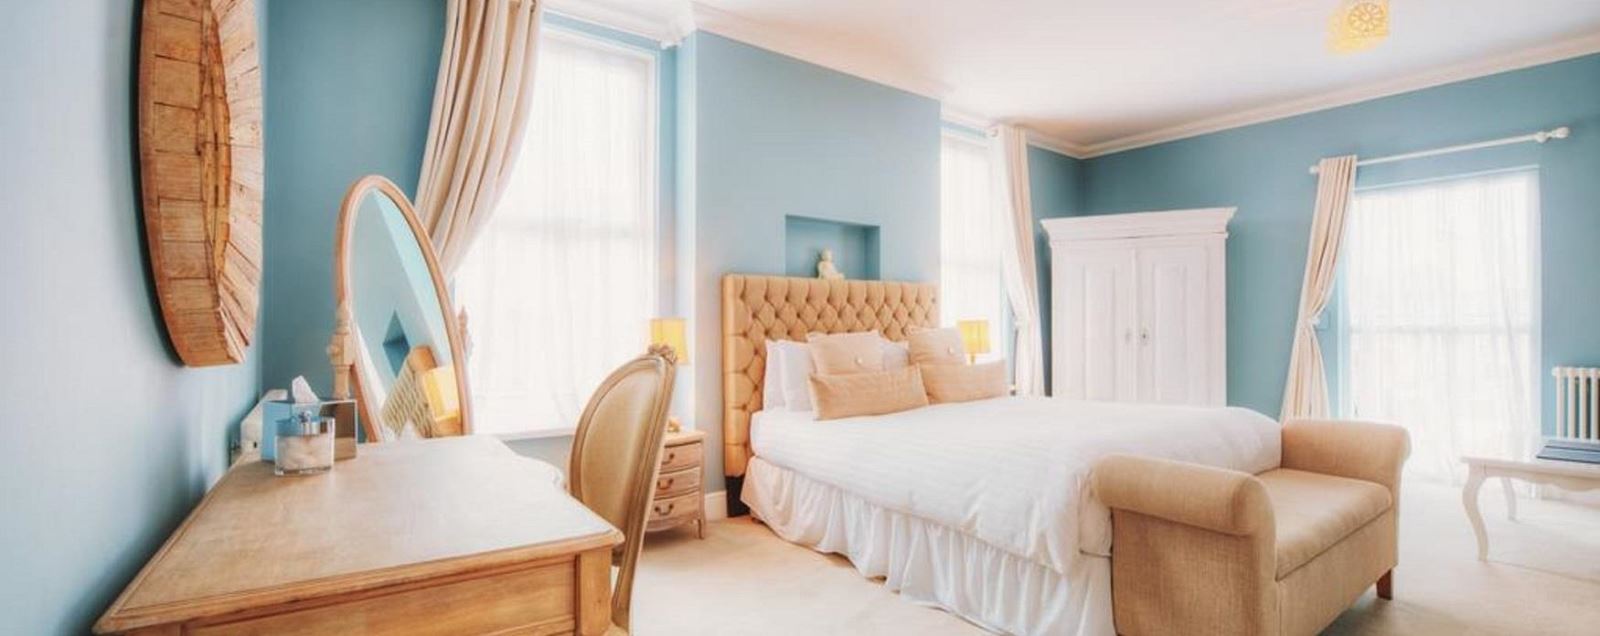 Hotel bedroom in blue and yellow decor